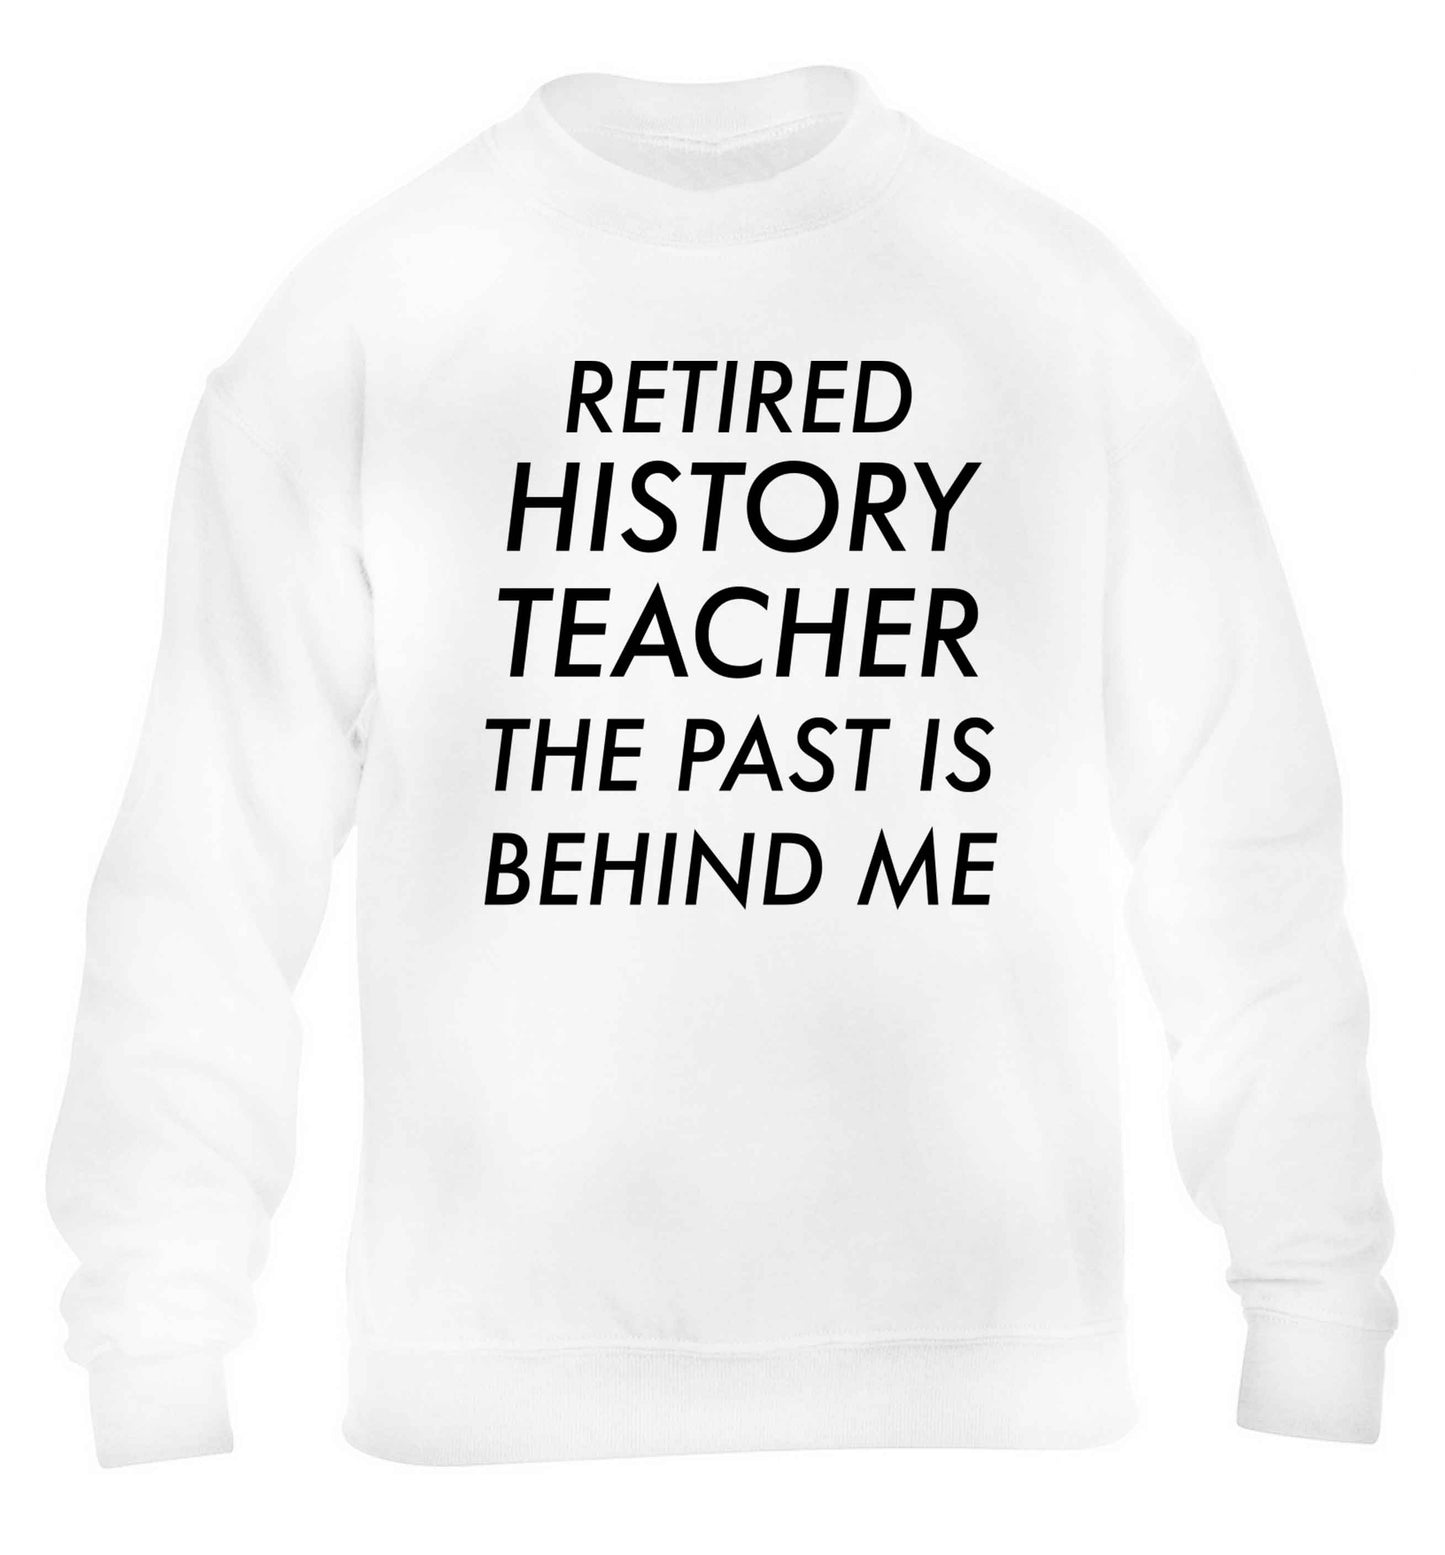 Retired history teacher the past is behind me children's white sweater 12-13 Years